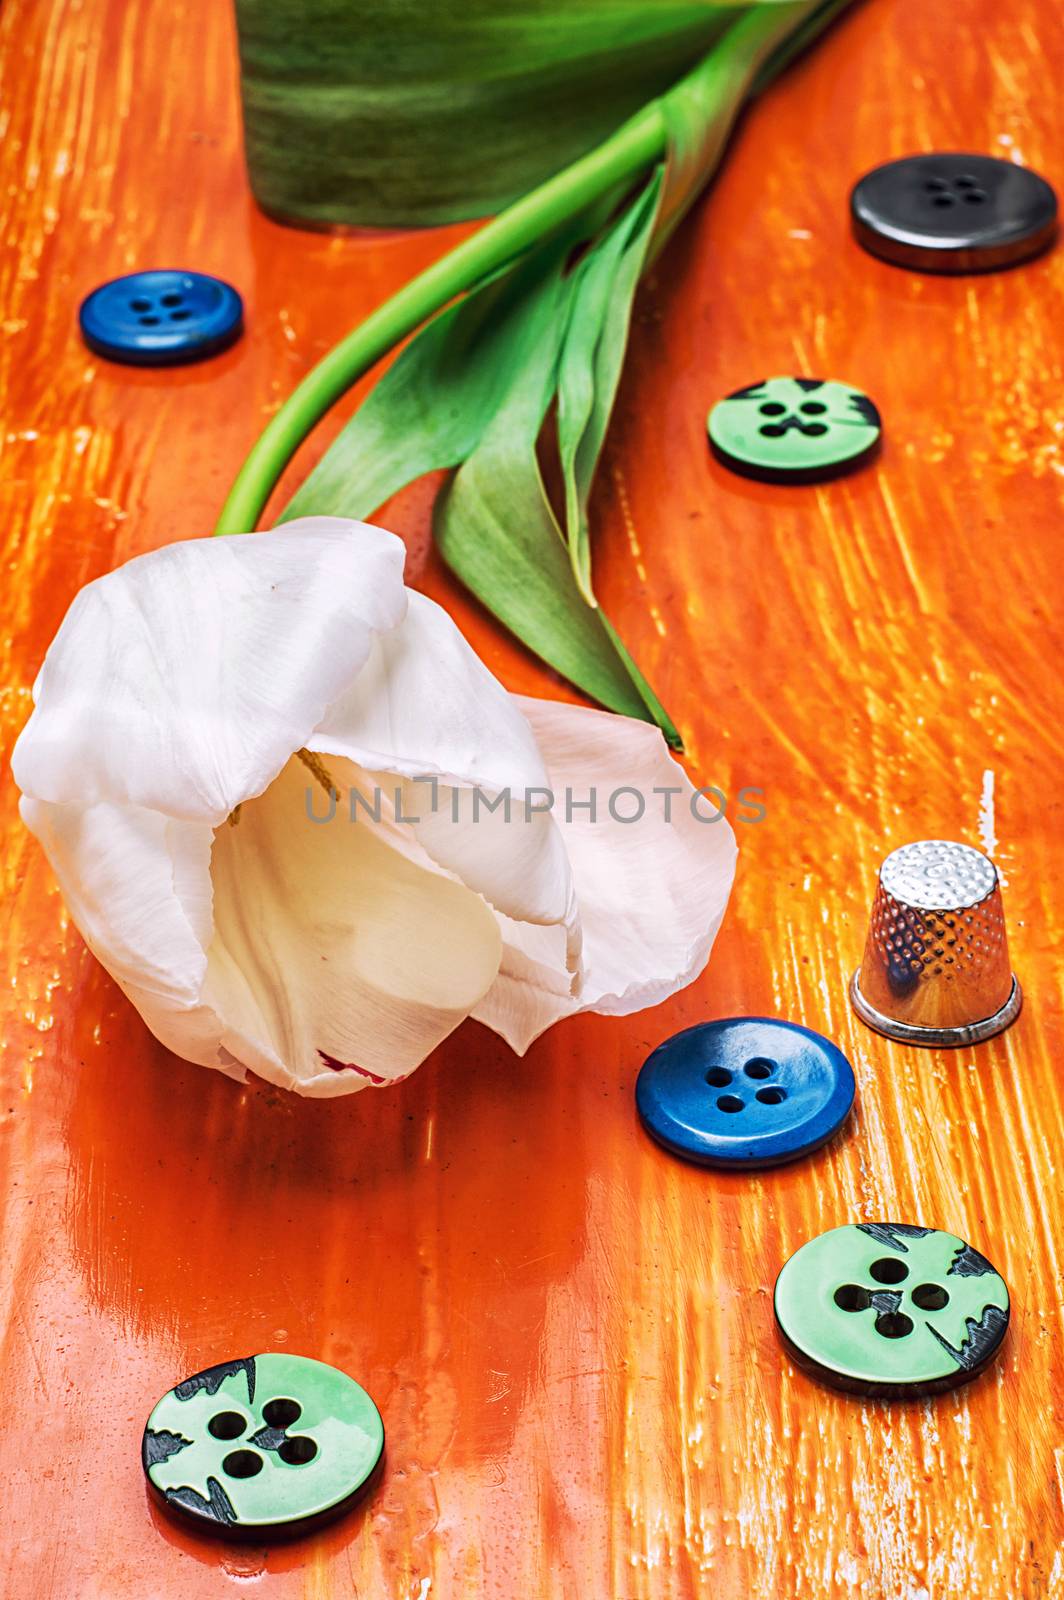 white tulip and buttons with thread on orange wooden background